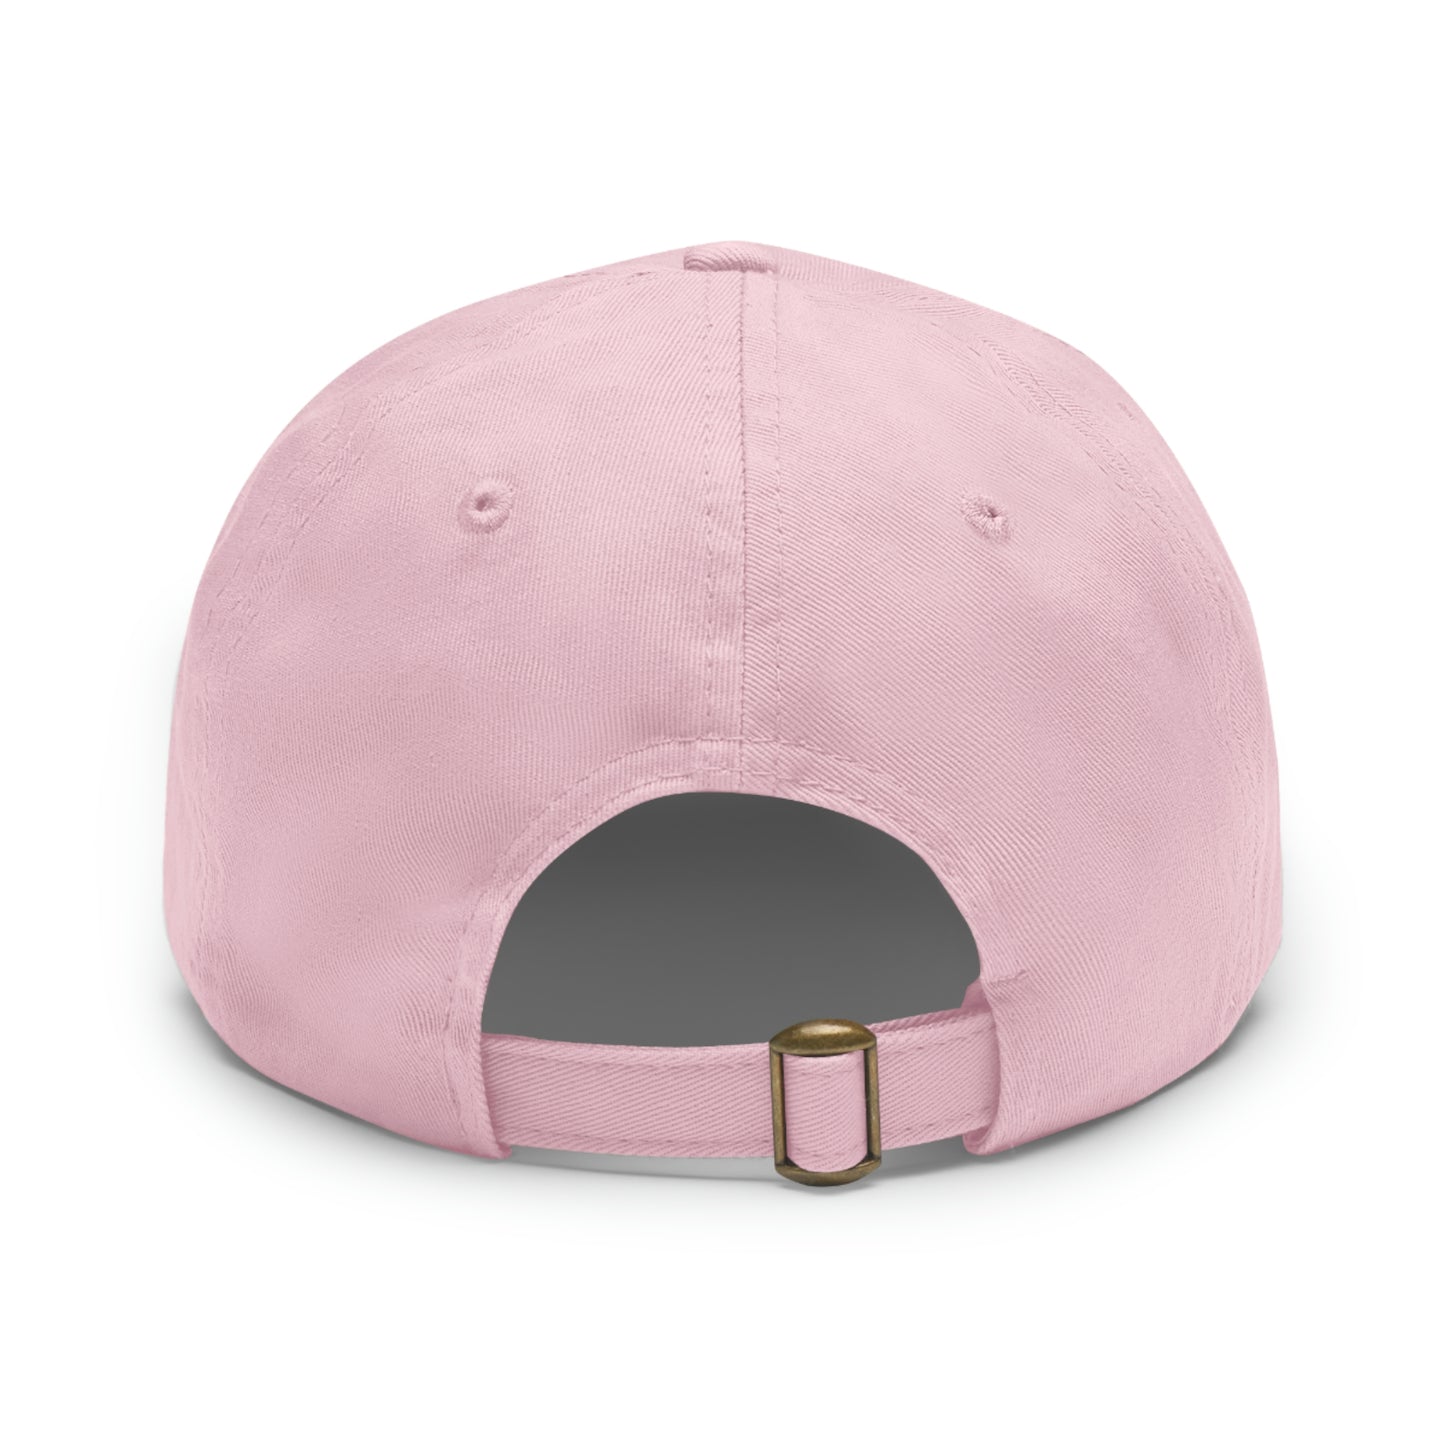 Mushroom 1 UP 8 Bit Style Dad Hat with Leather Patch